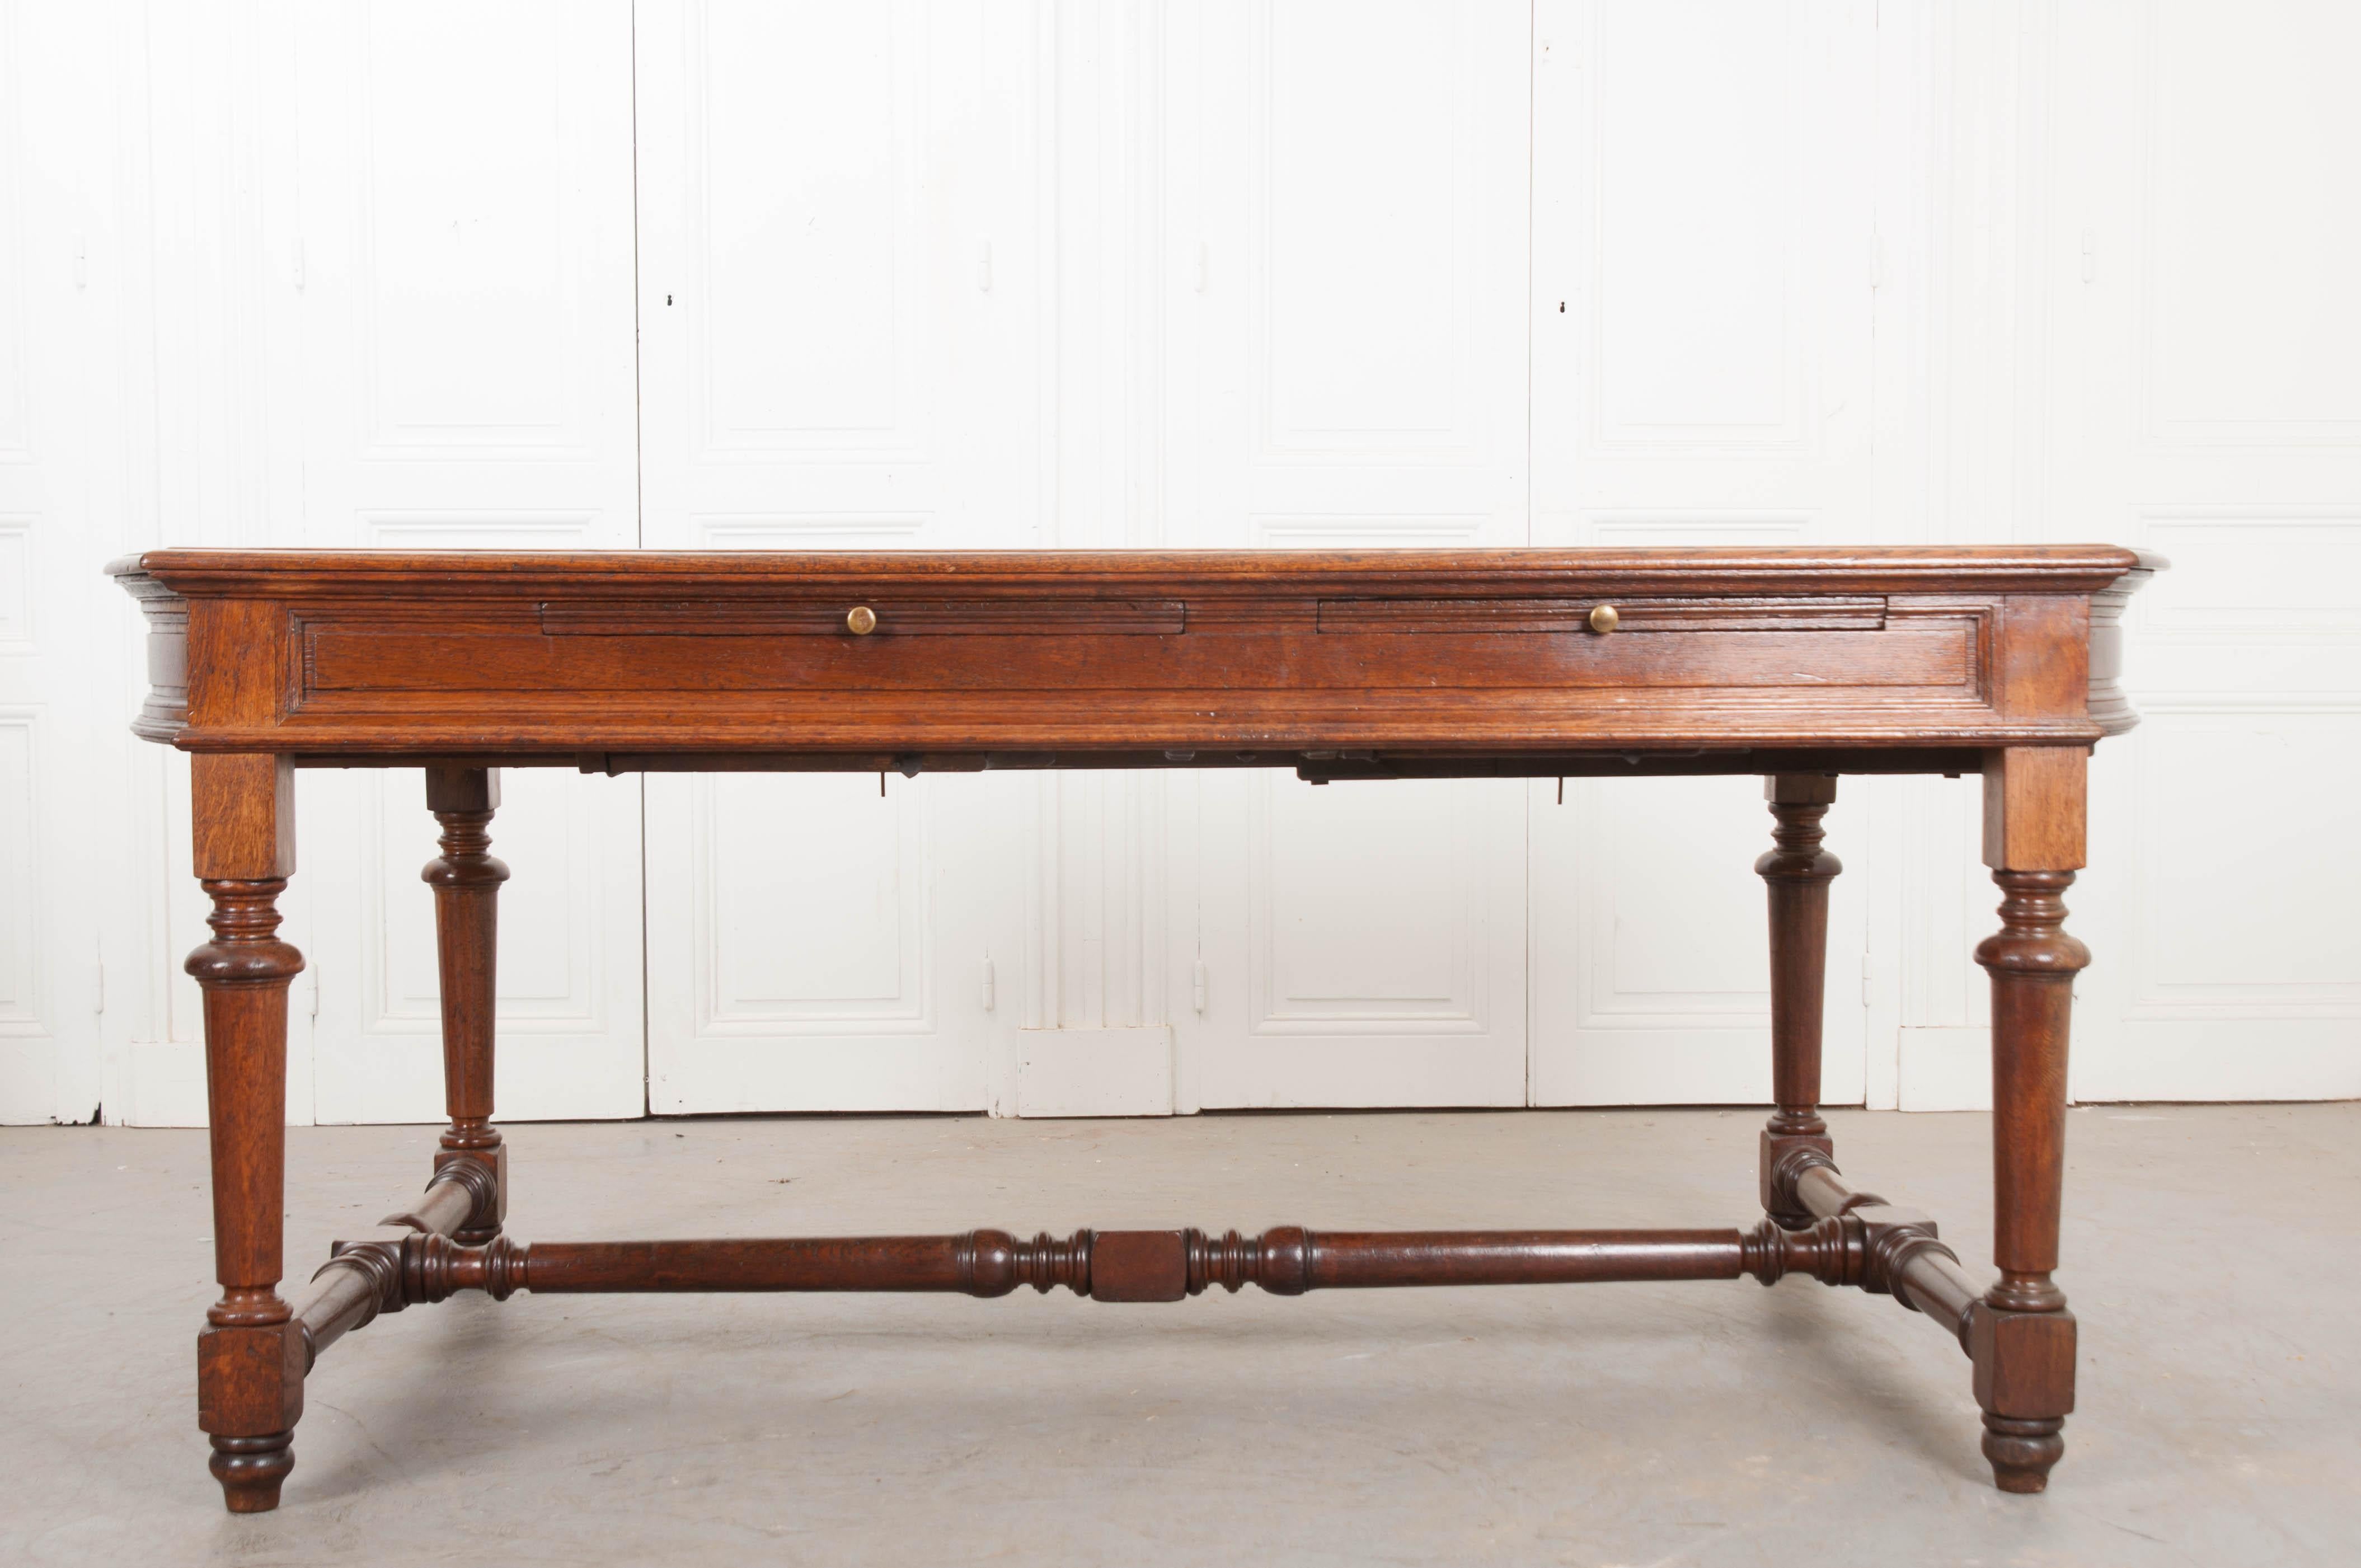 This fantastic oak sewing table is from France, circa 1860. Large enough for two people sitting next to each other, one side features a pair of slide-out surfaces, each outfitted with carved compartments for scissors and a duster. There is also a